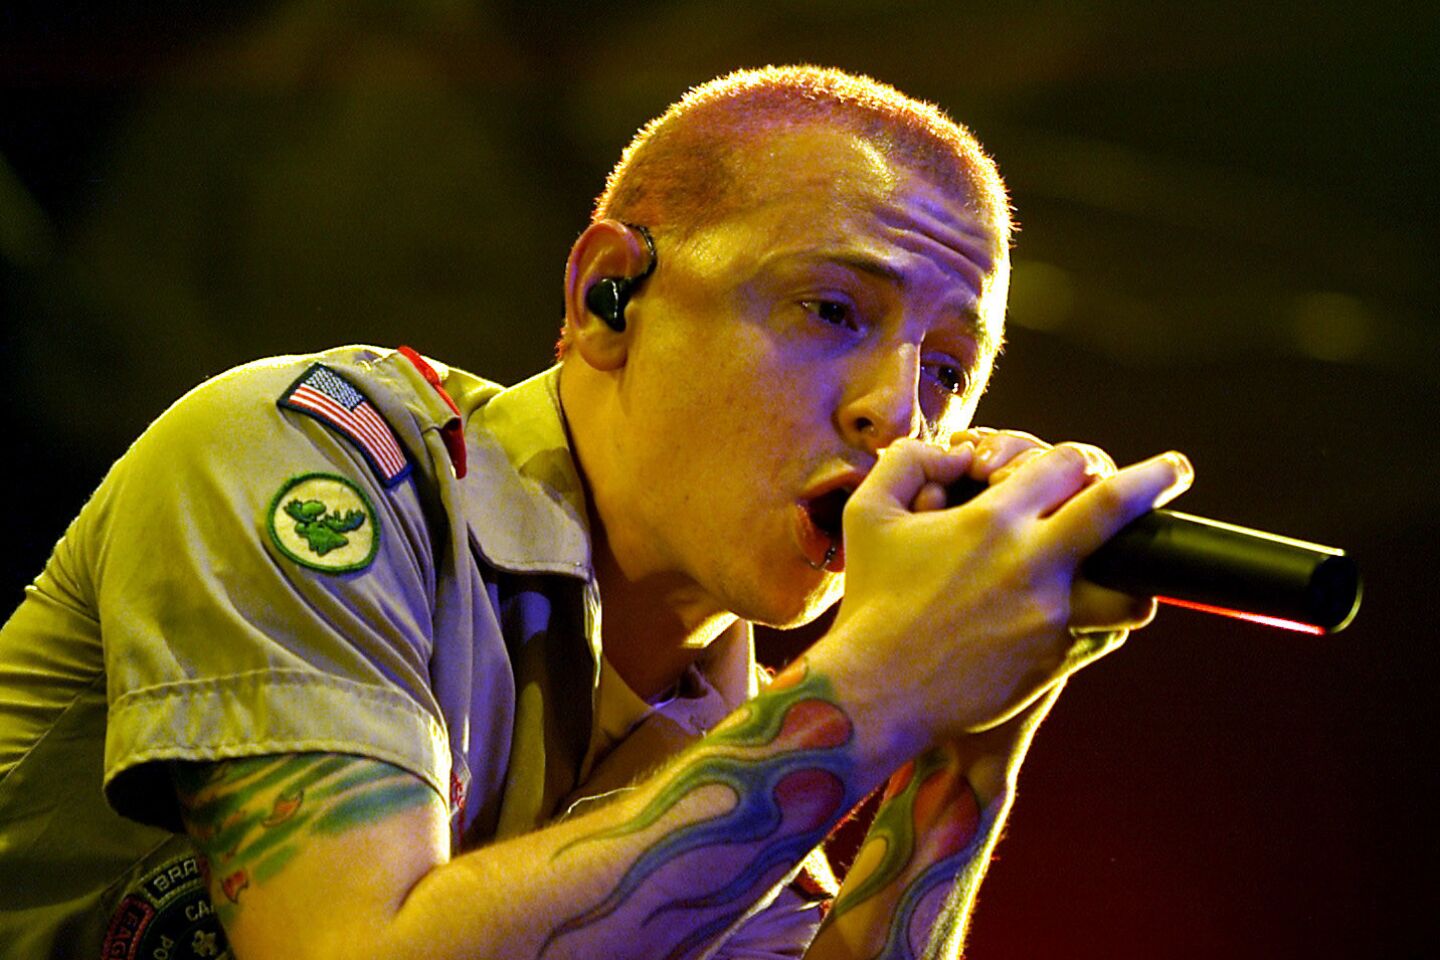 Chester Bennington: Life in pictures